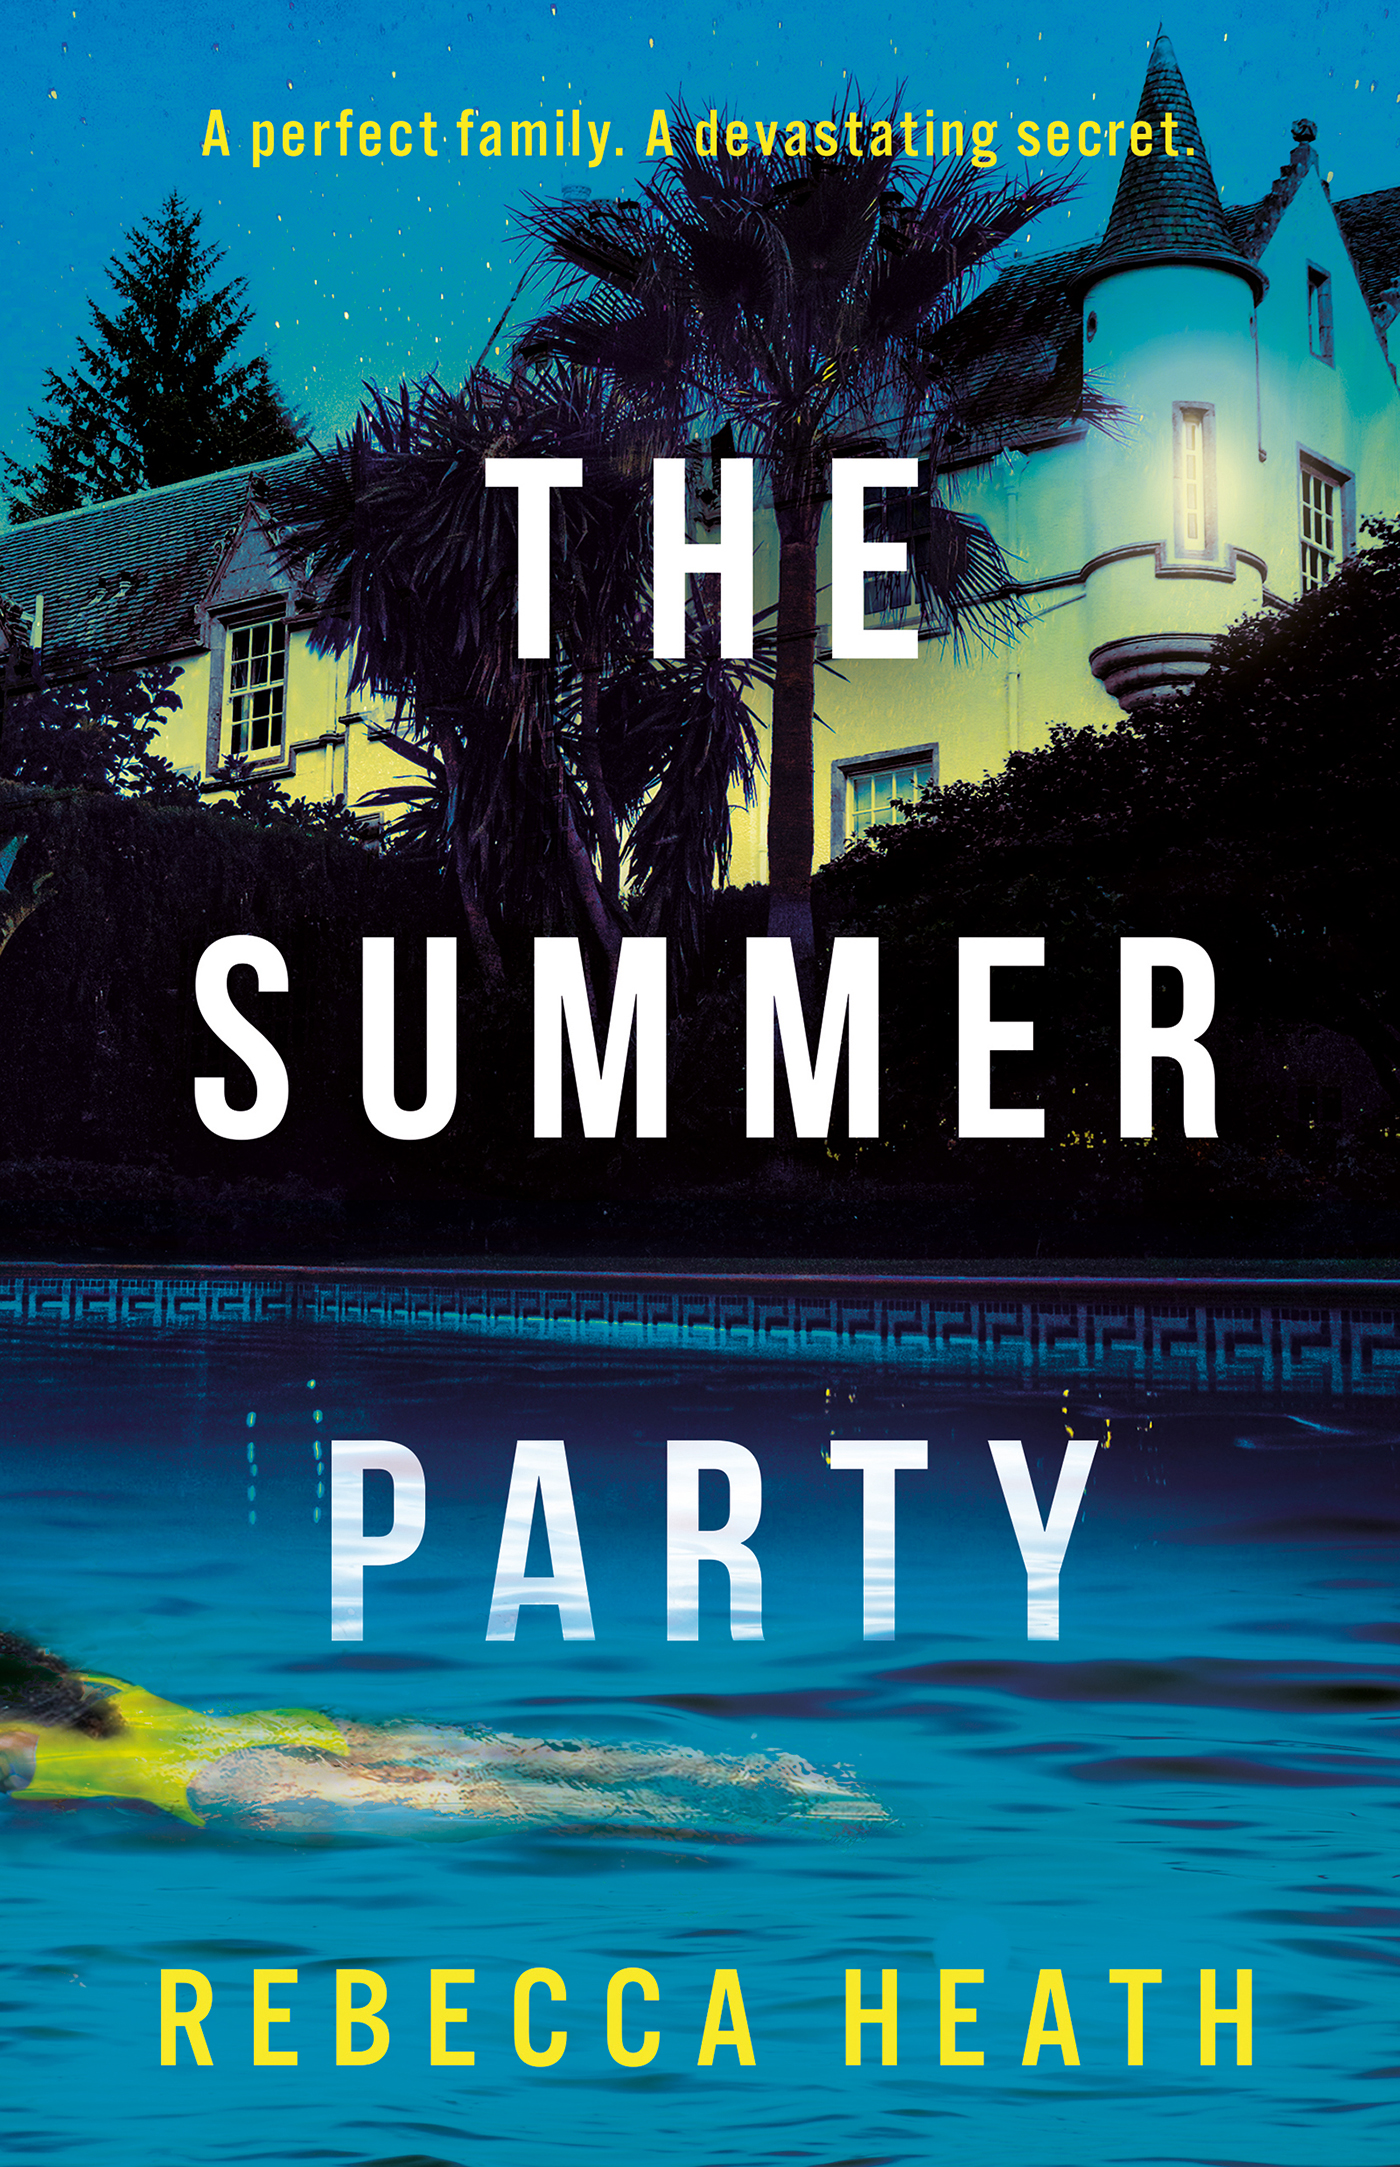 The Summer Party